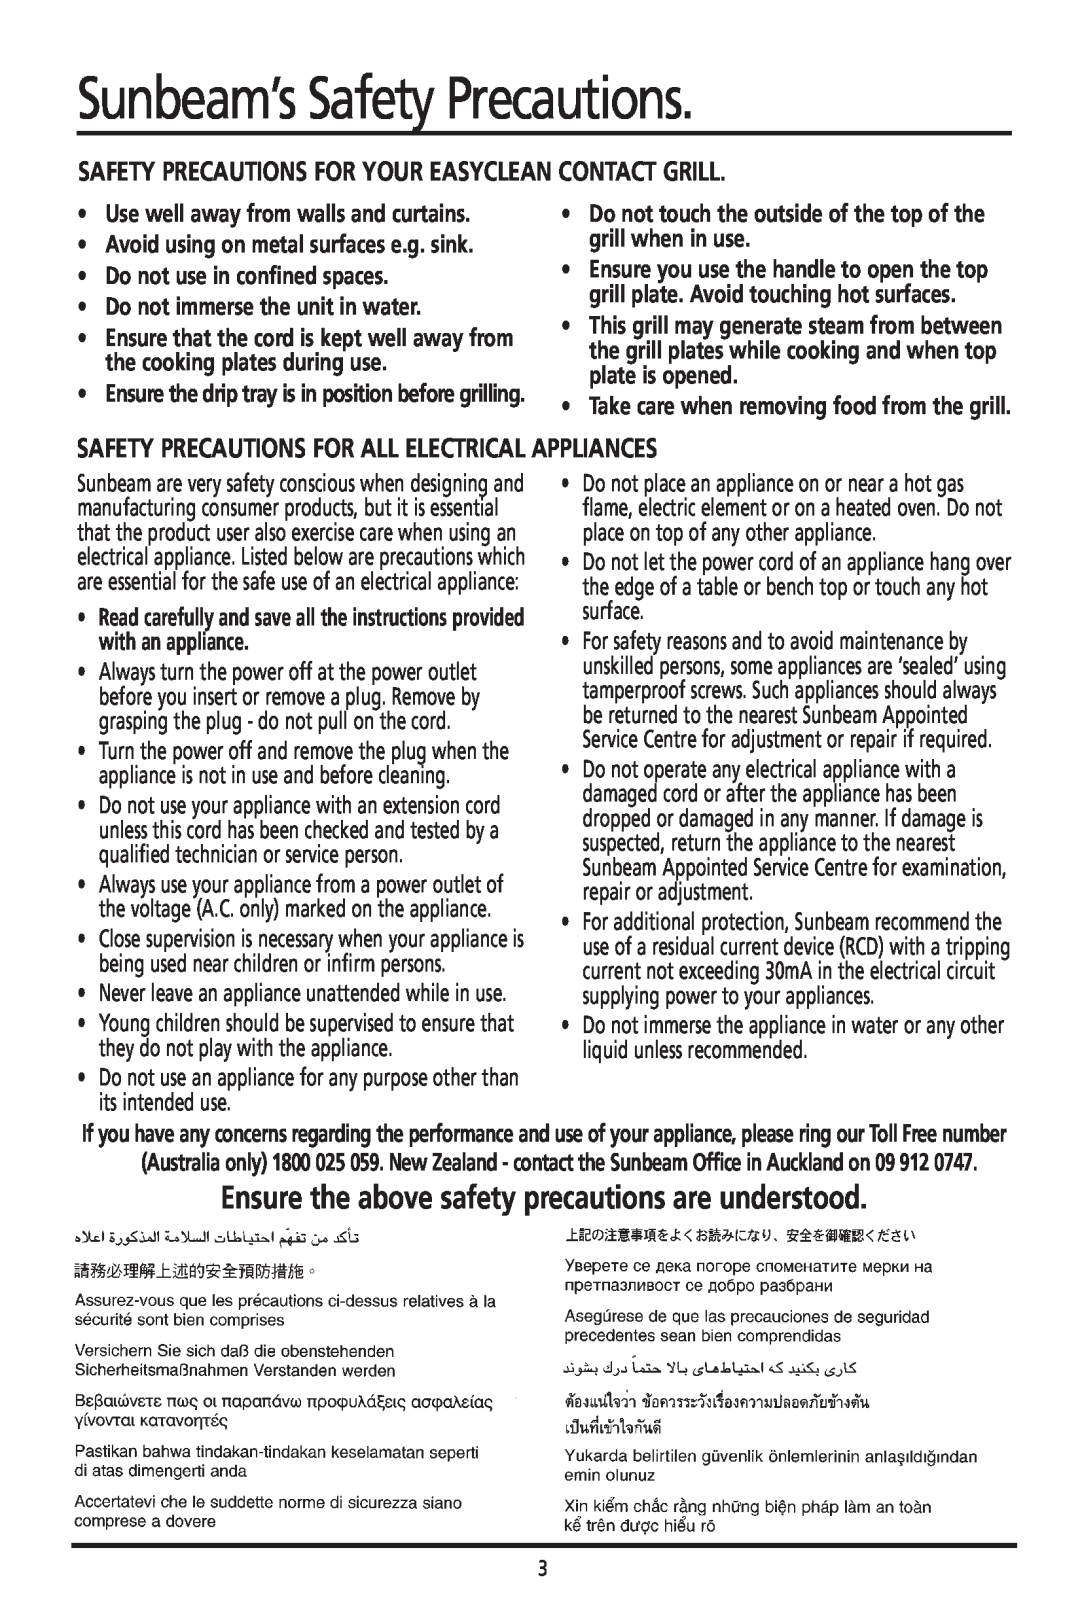 Sunbeam GC2600 manual Sunbeam’s Safety Precautions, Safety Precautions For All Electrical Appliances 